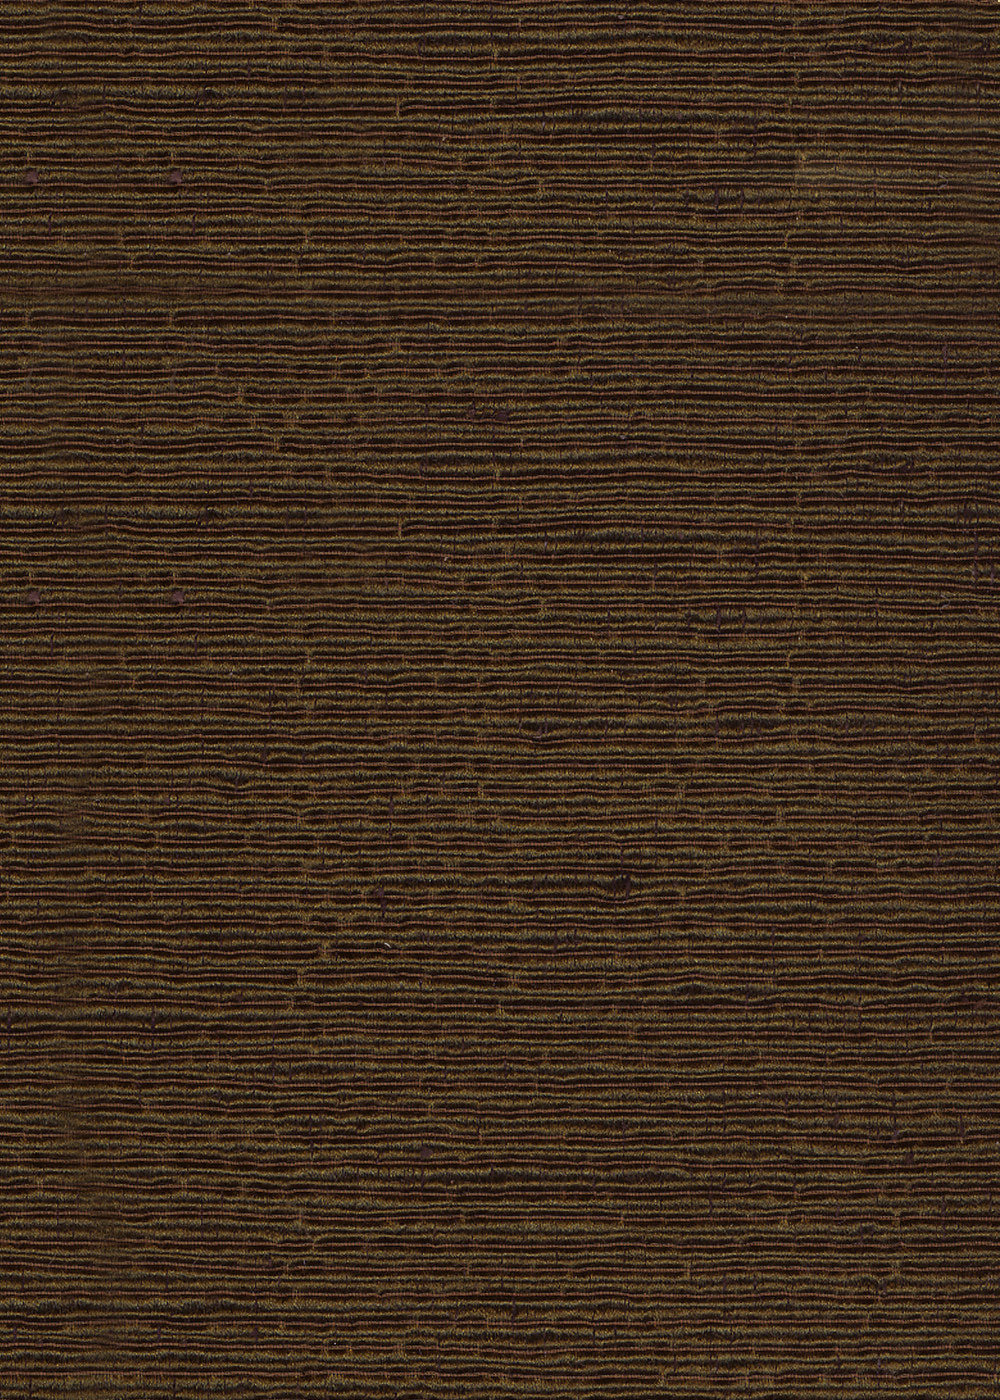 chocolate brown fabric with a horizontal ribbed texture